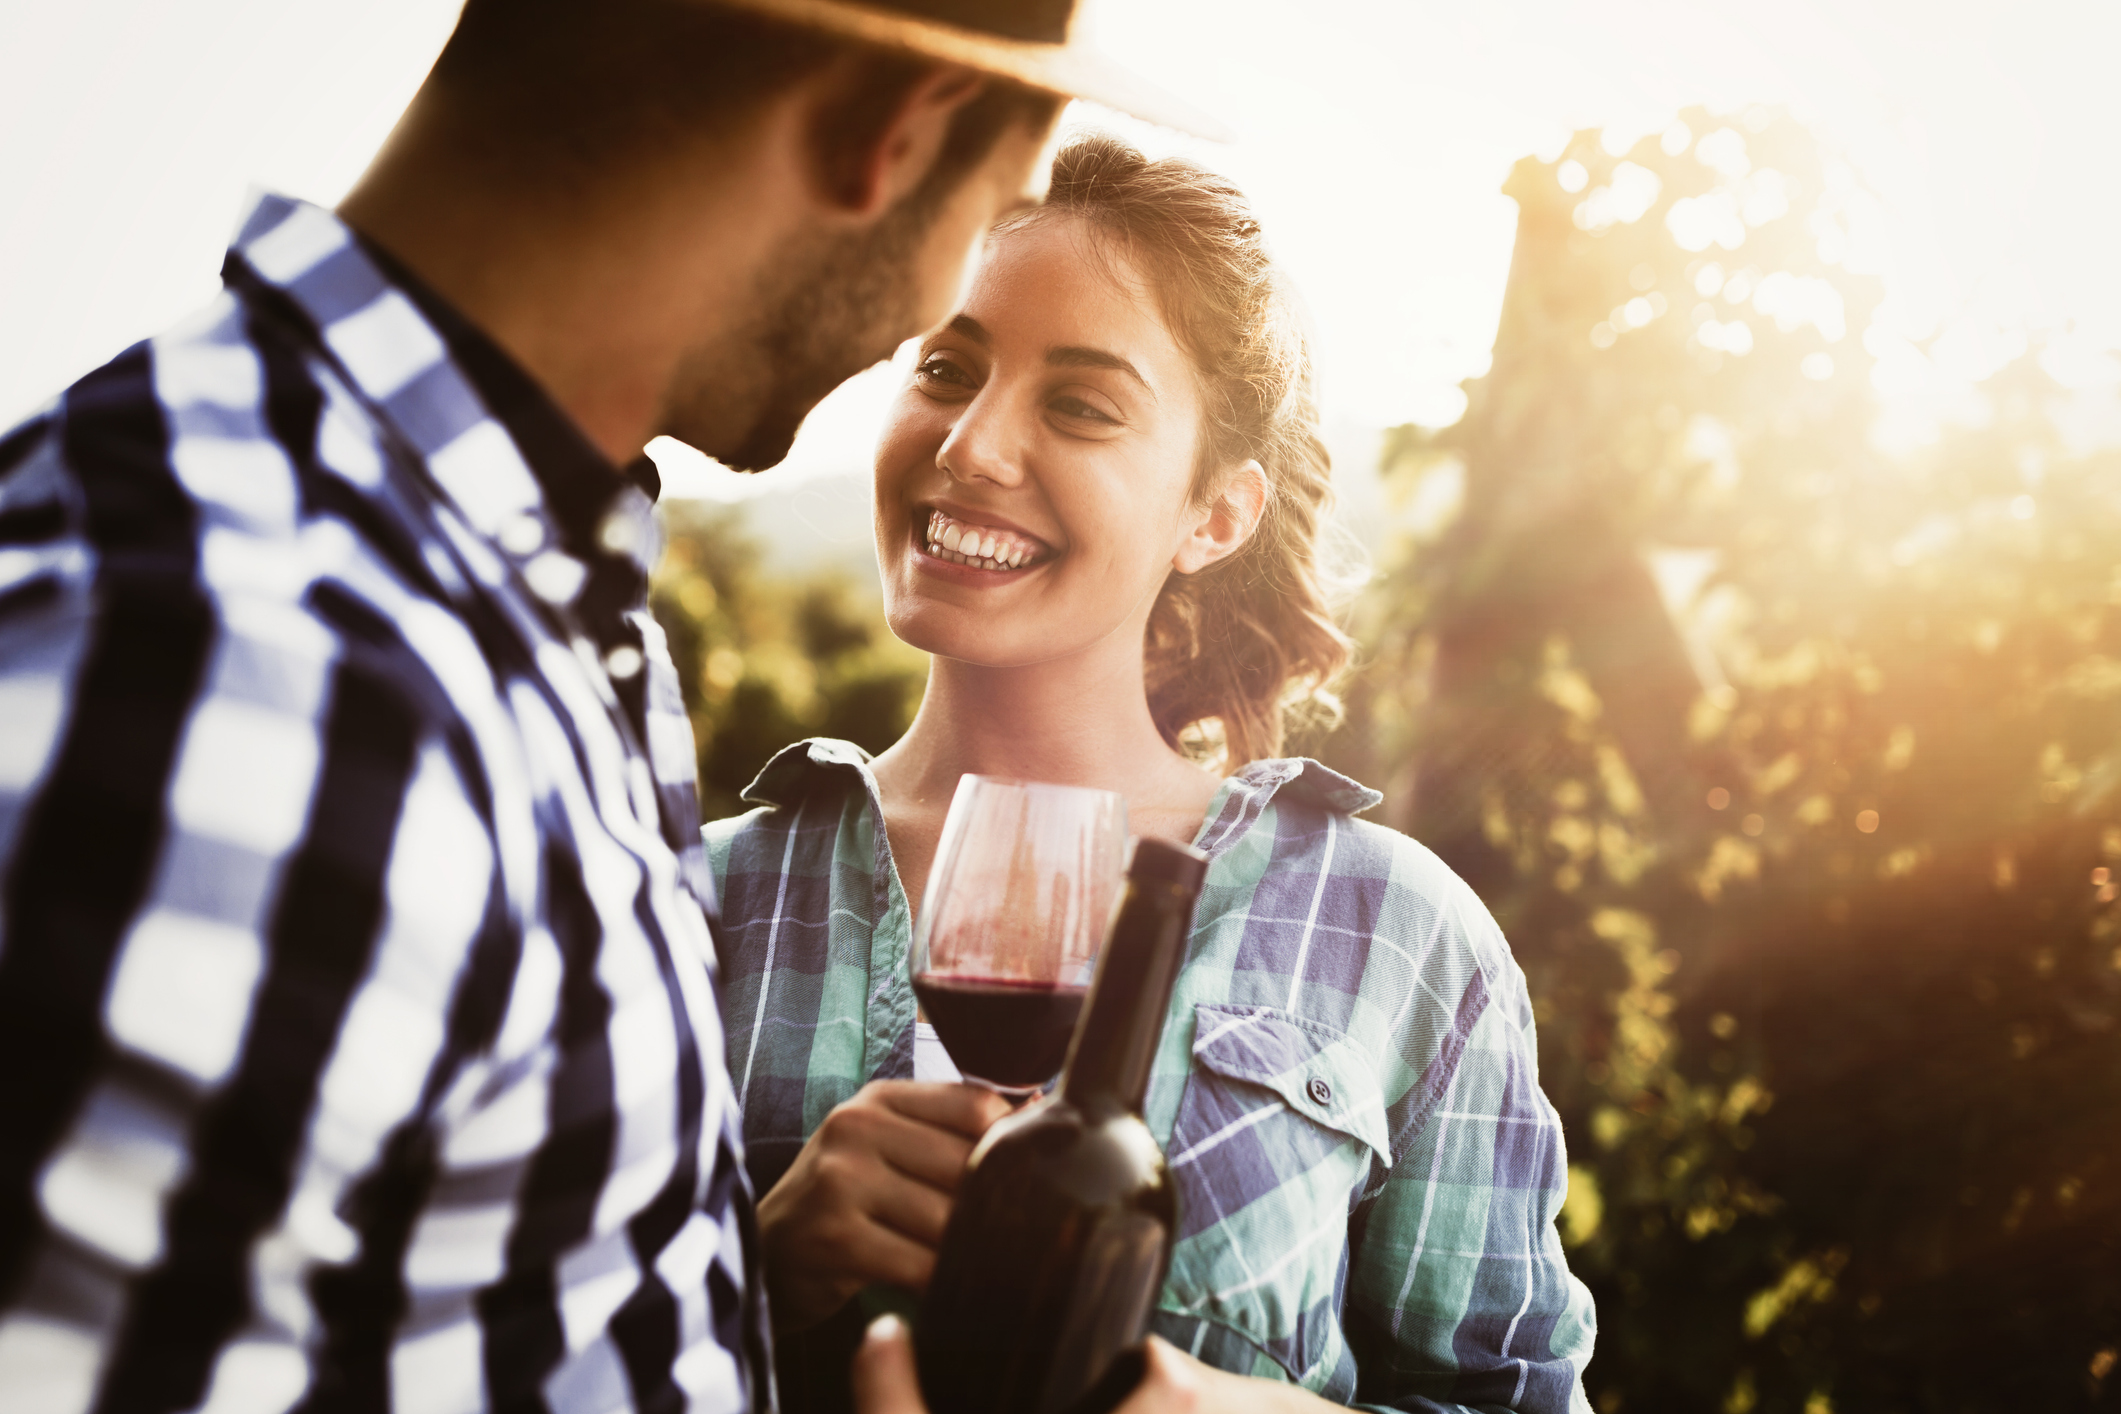 man and woman in a vineyard drinking wine